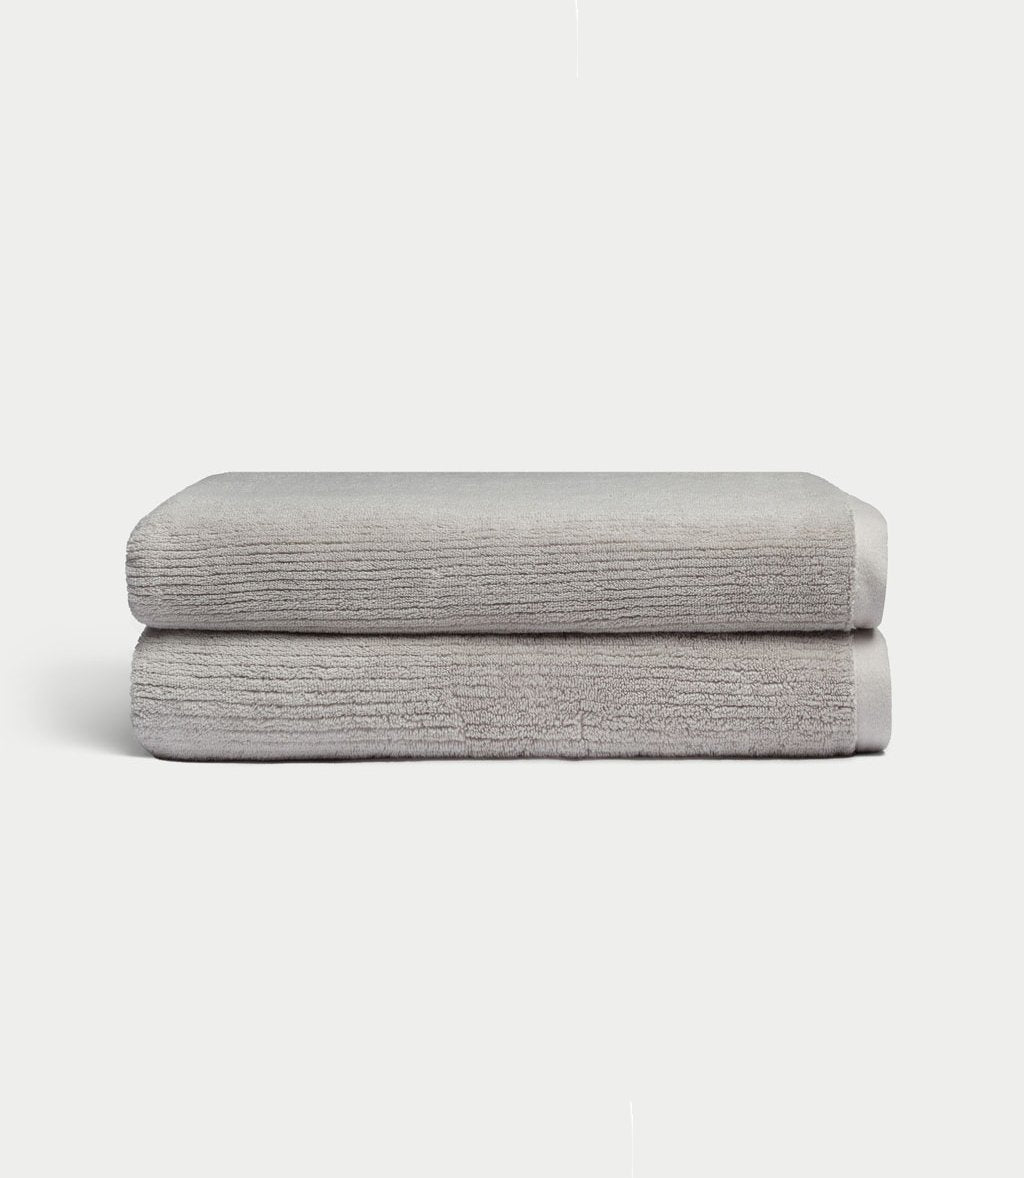 Ribbed Terry Bath Sheets in the color Light Grey. Photo of product taken with white background. |Color:Light Grey